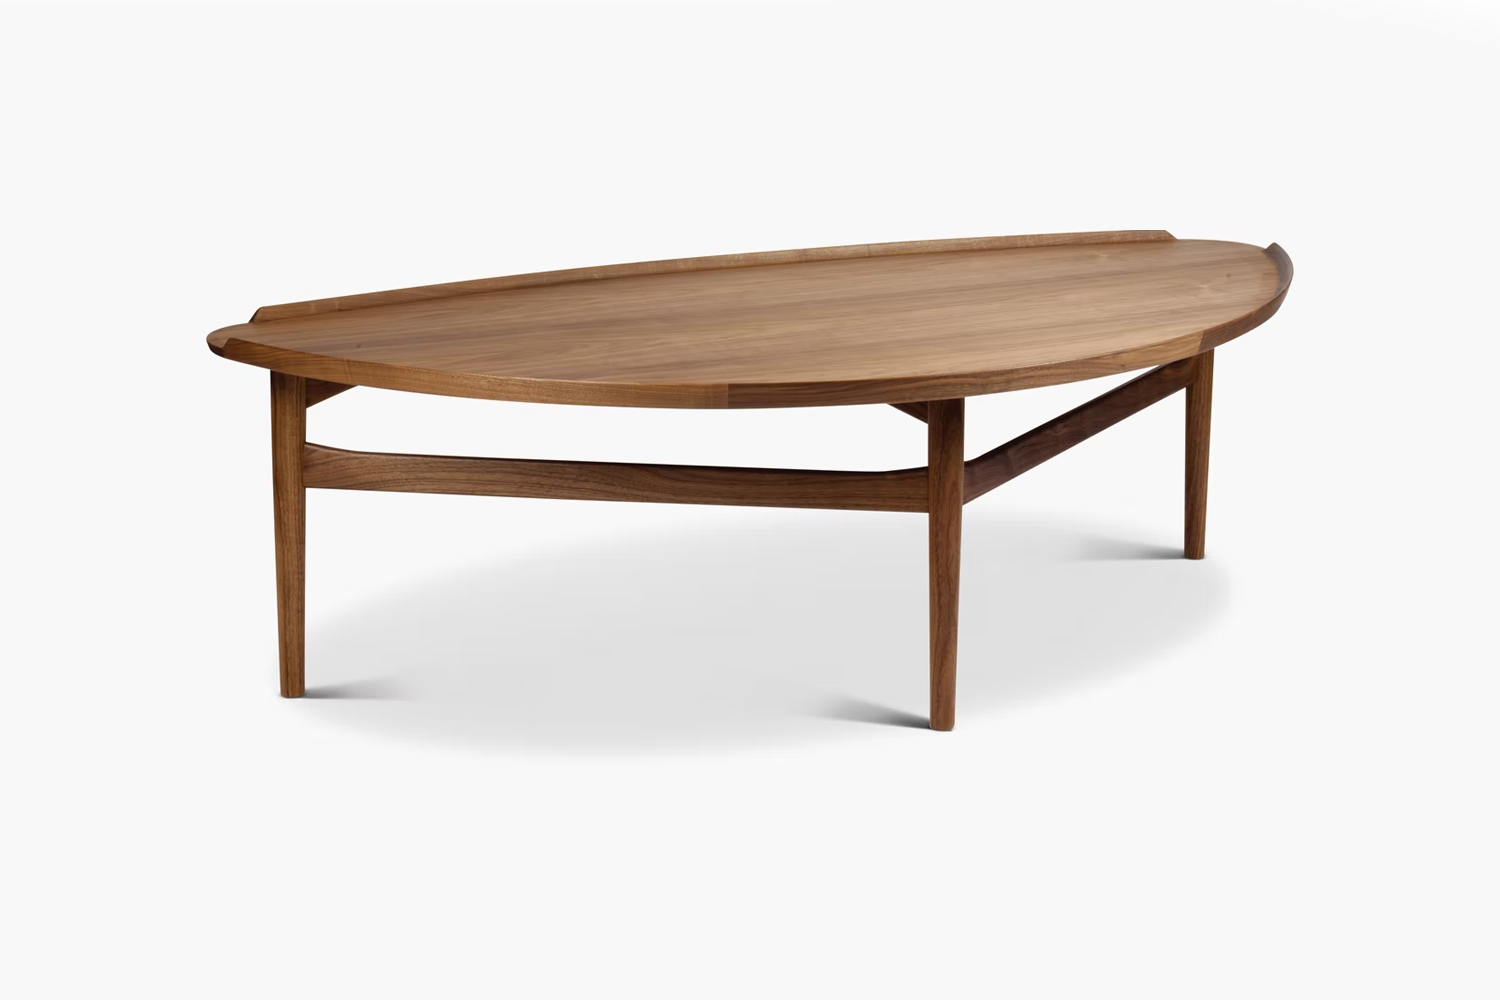 for a similar oblong shaped coffee table, the finn juhl cocktail table in walnu 20